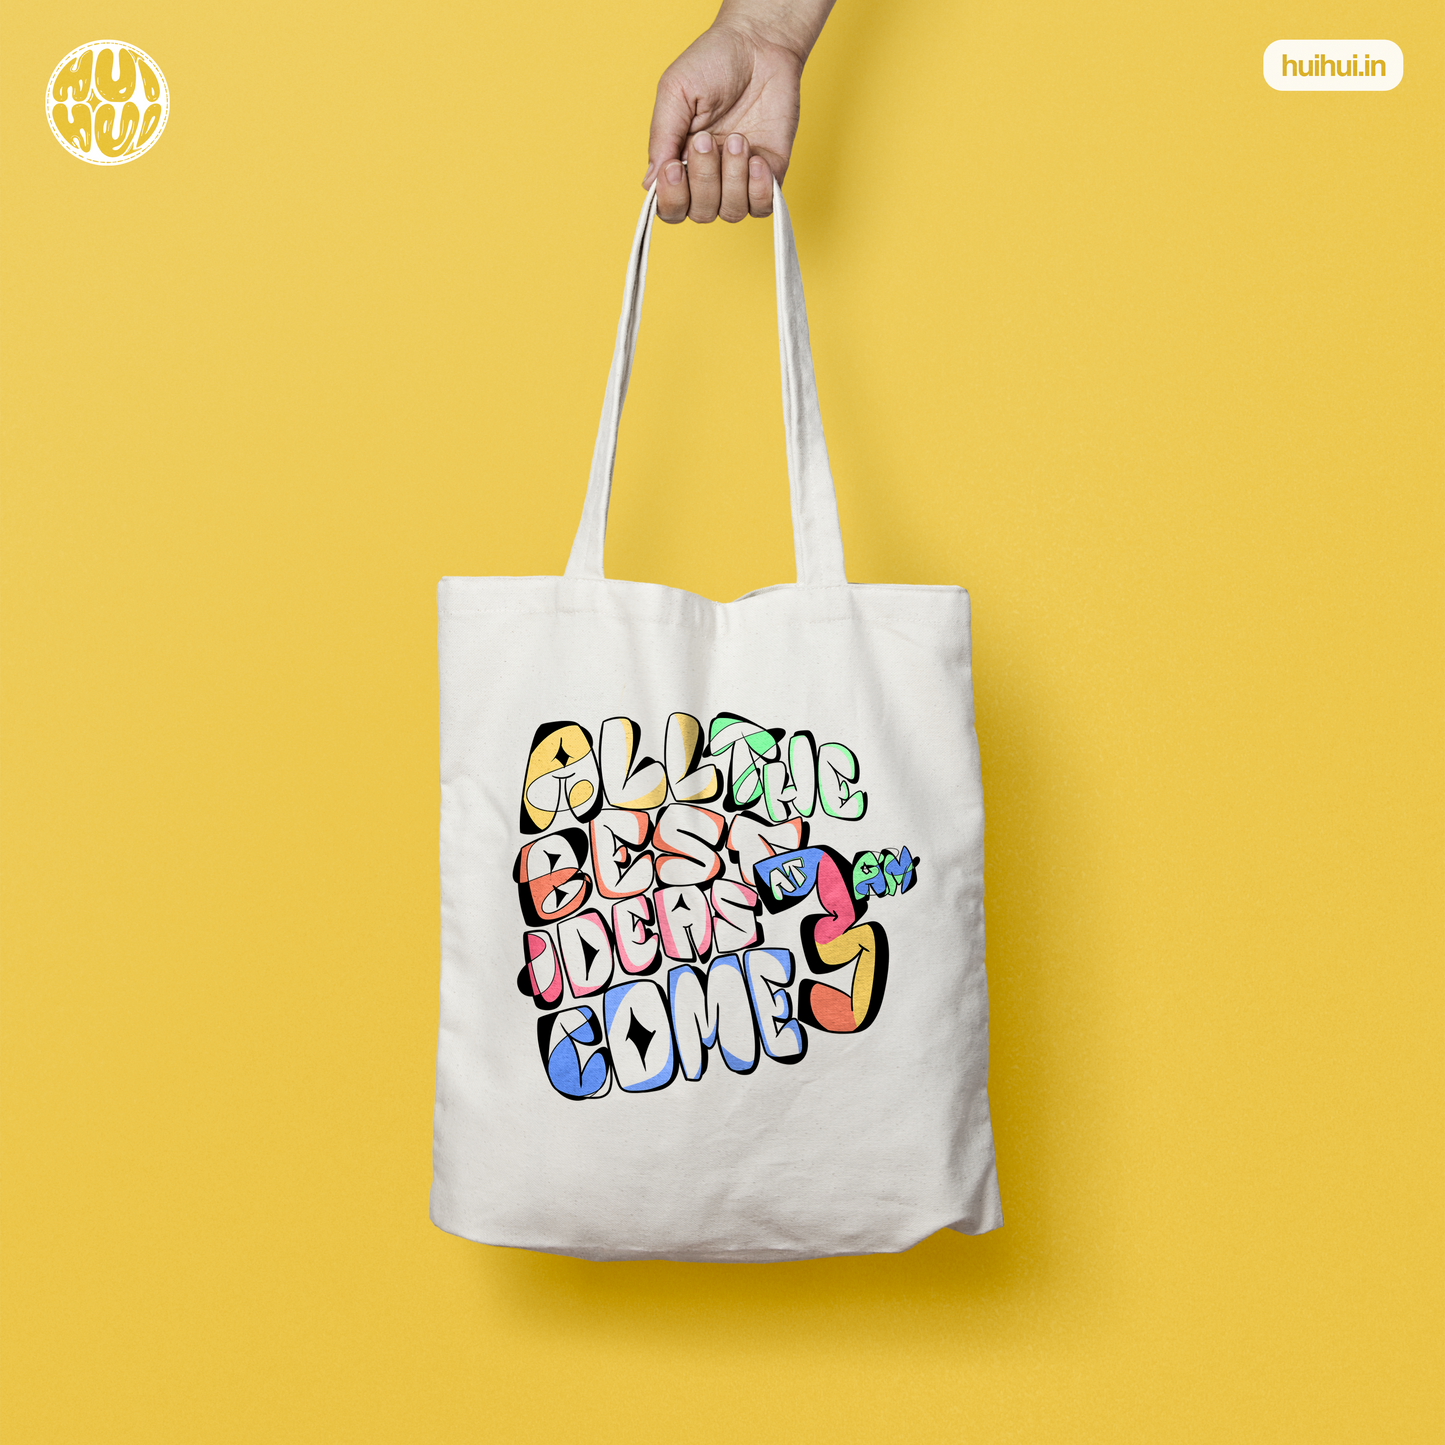 All the best Ideas (Totebag) by Huihui